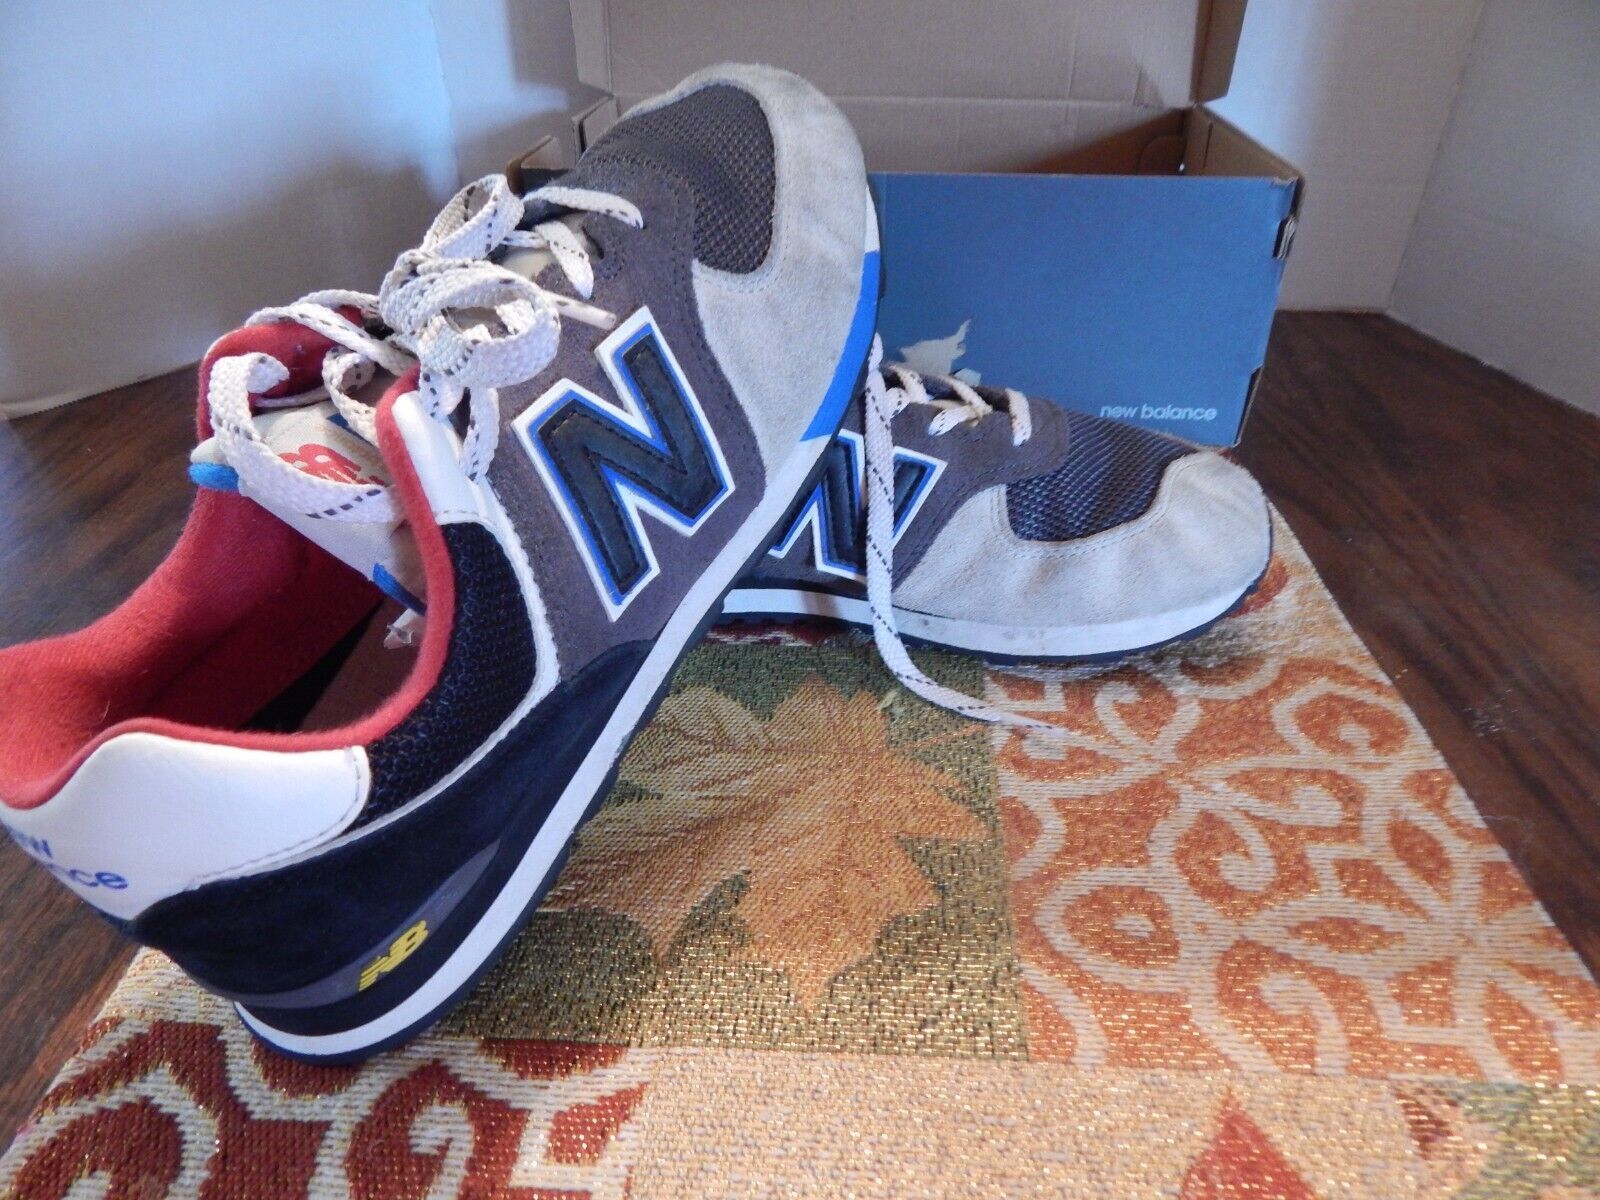 A pair of new balance shoes on a rug. - New Balance